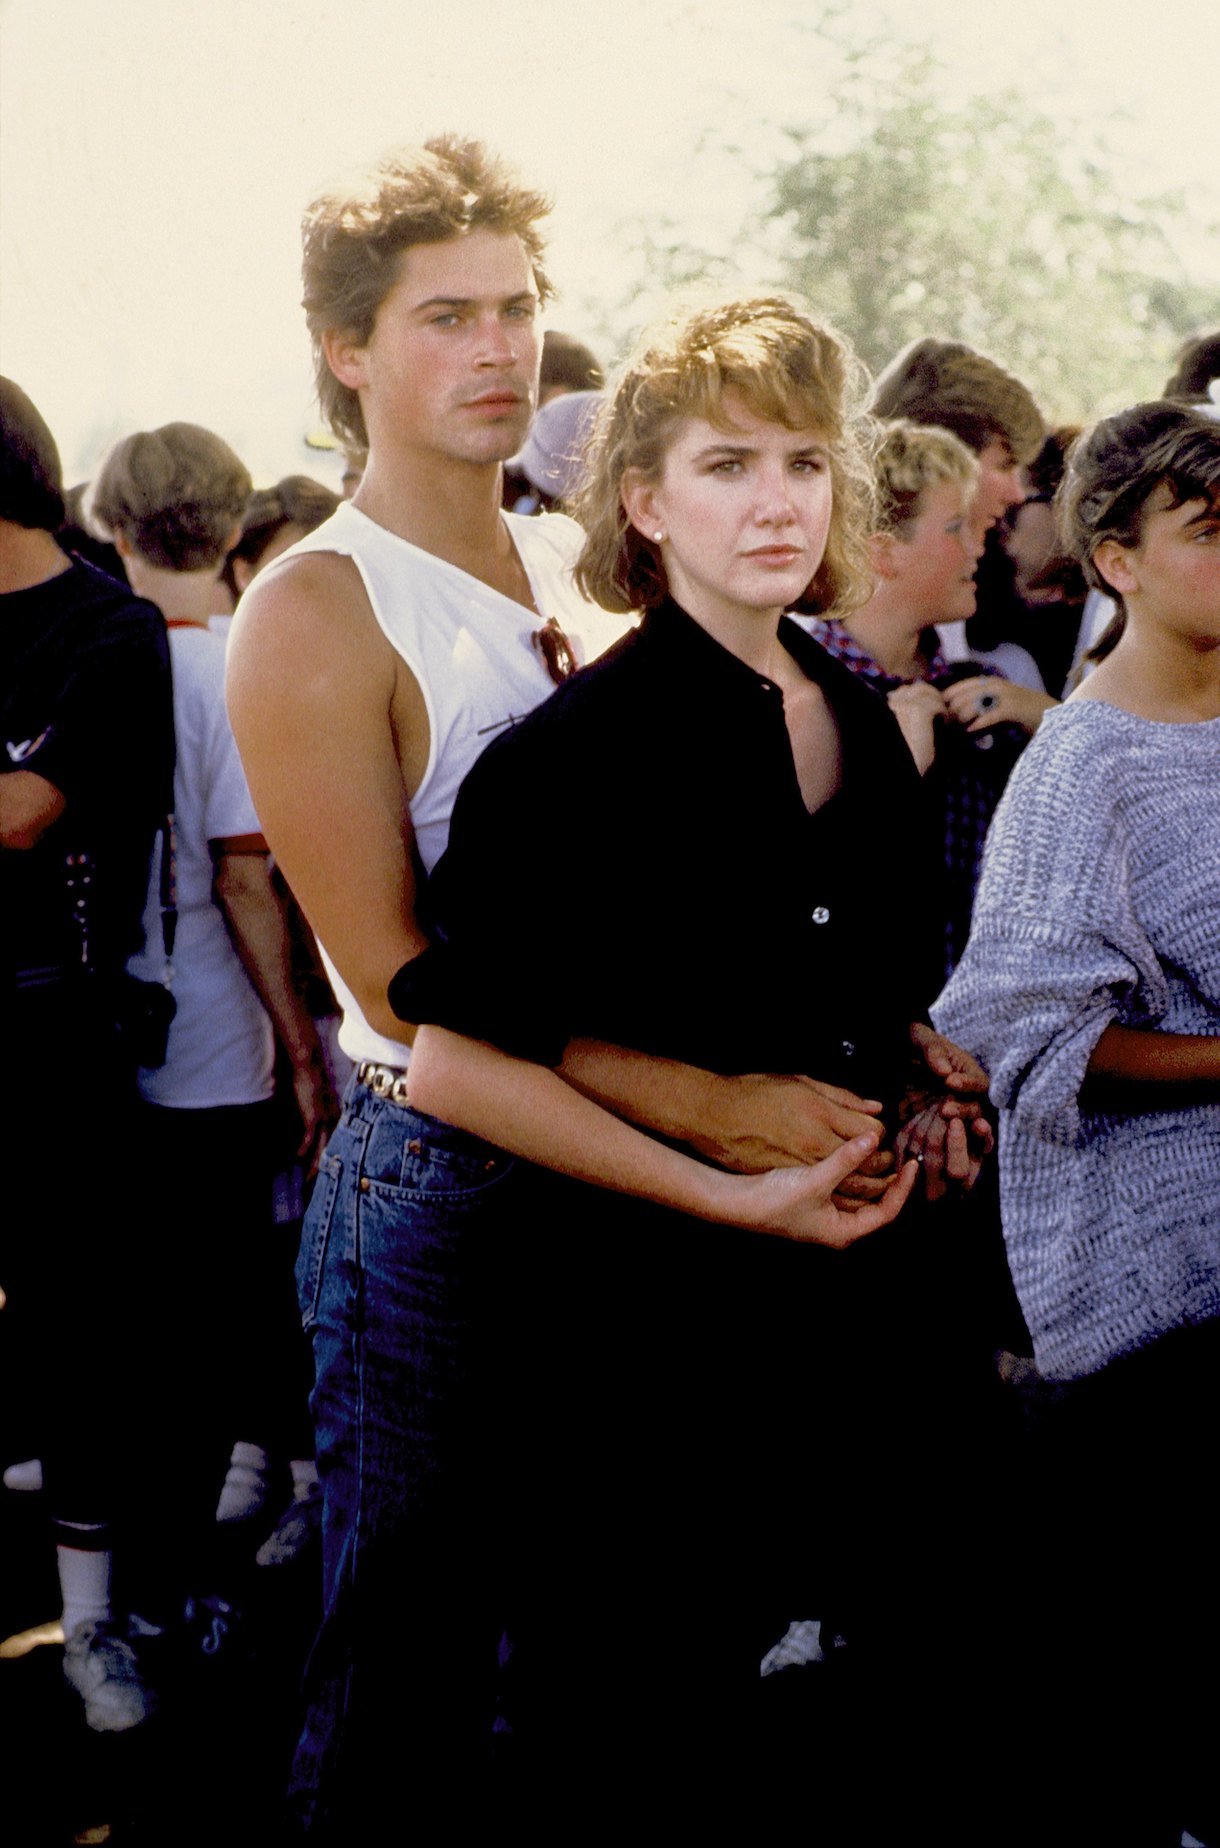 Rob Lowe and Melissa Gilbert in 1982